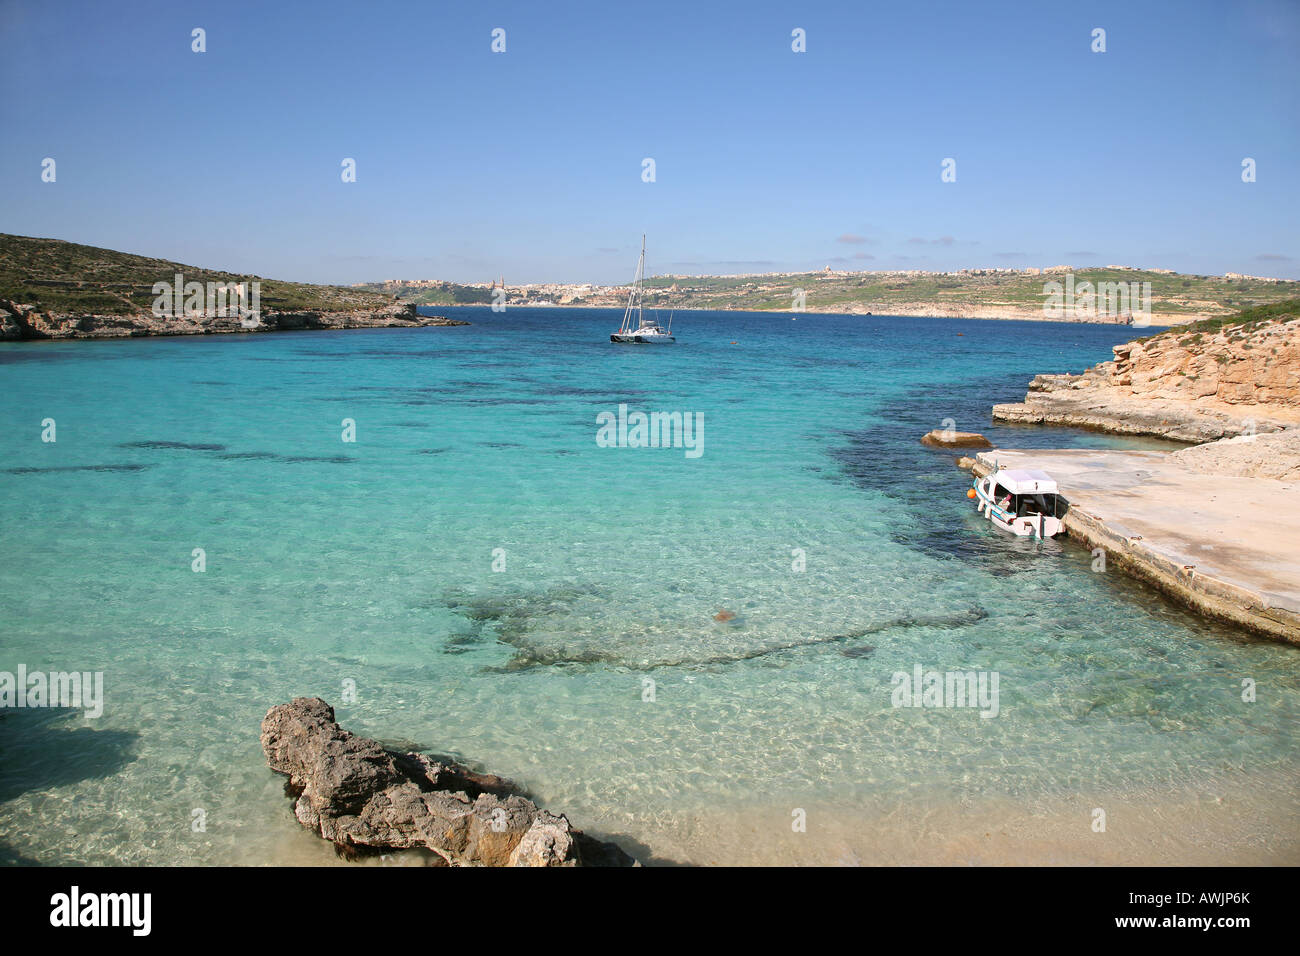 The blue Lagoon On Comino Island Malta. The small Island of Gozo can be seen in the background Stock Photo